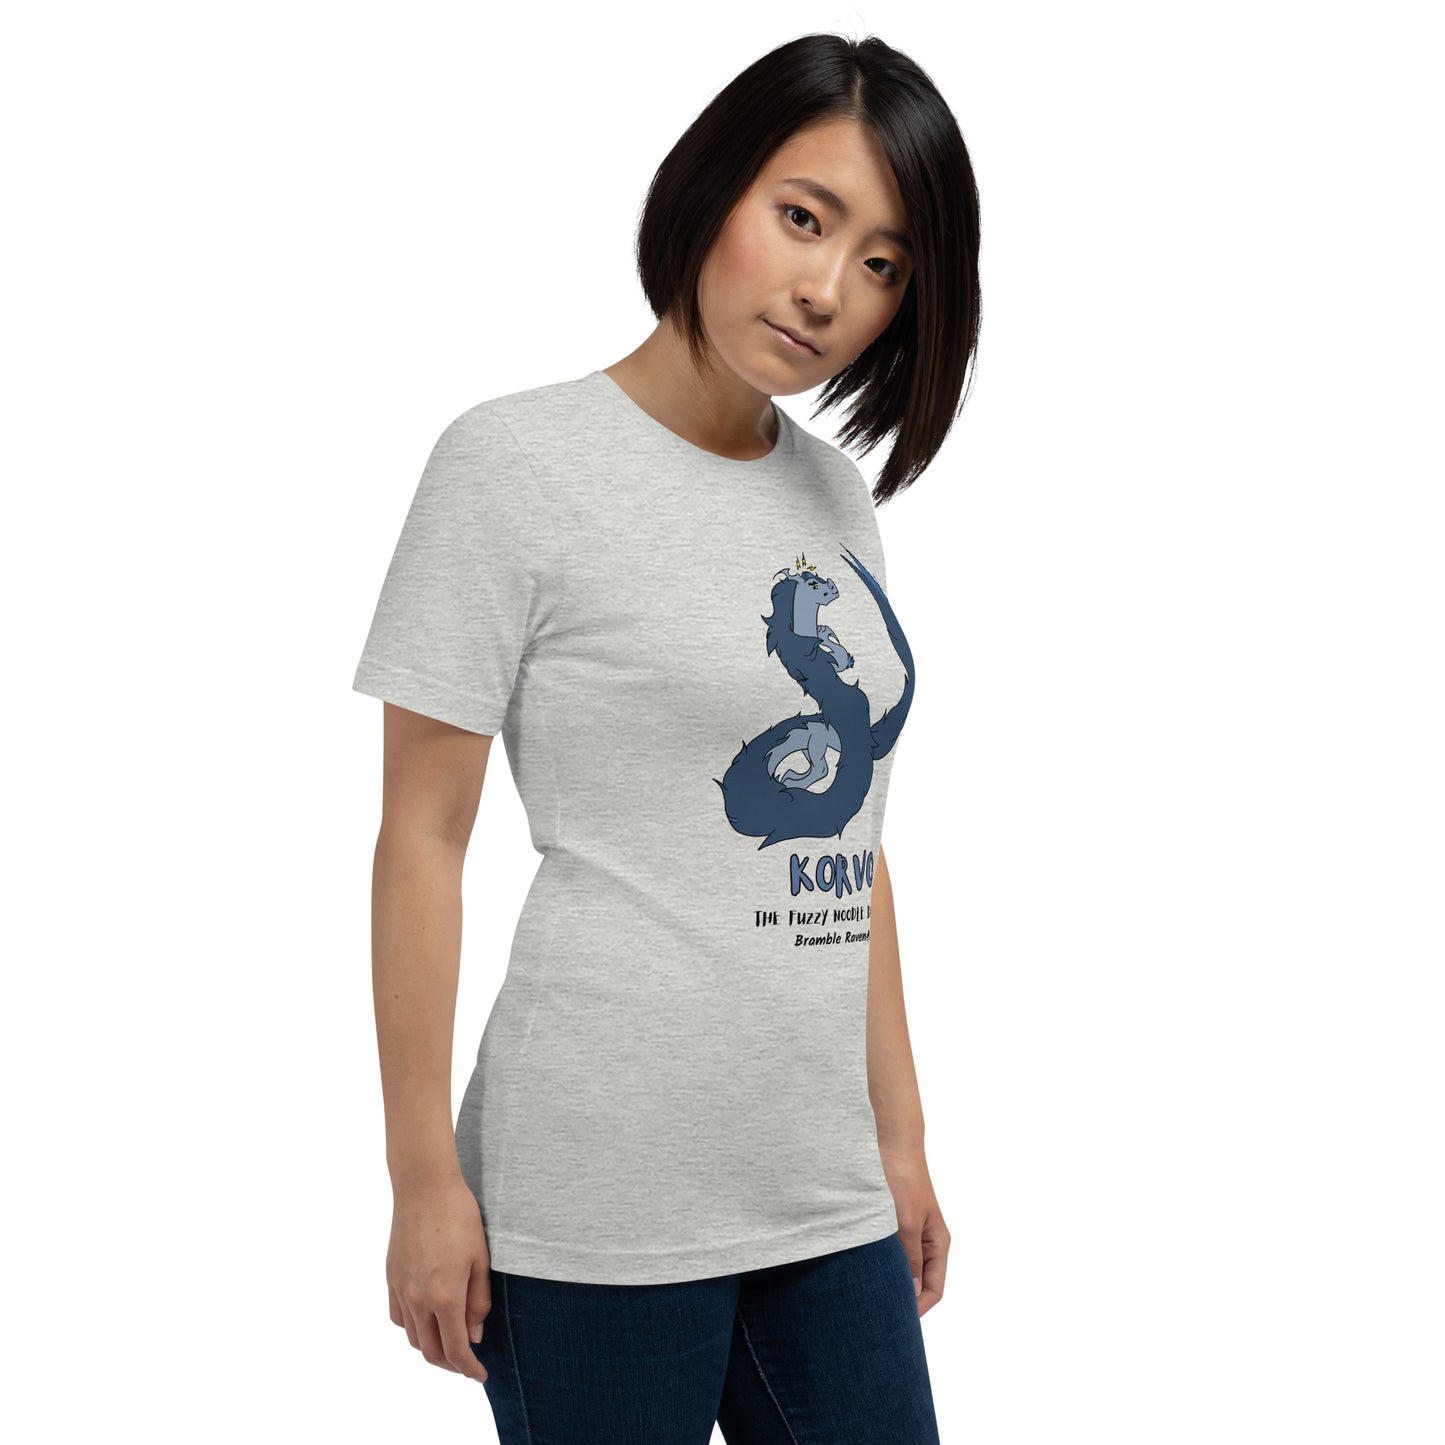 Korvo the angry Fuzzy Noodle Dragon on an athletic heather grey unisex t-shirt. Shown on a female model.